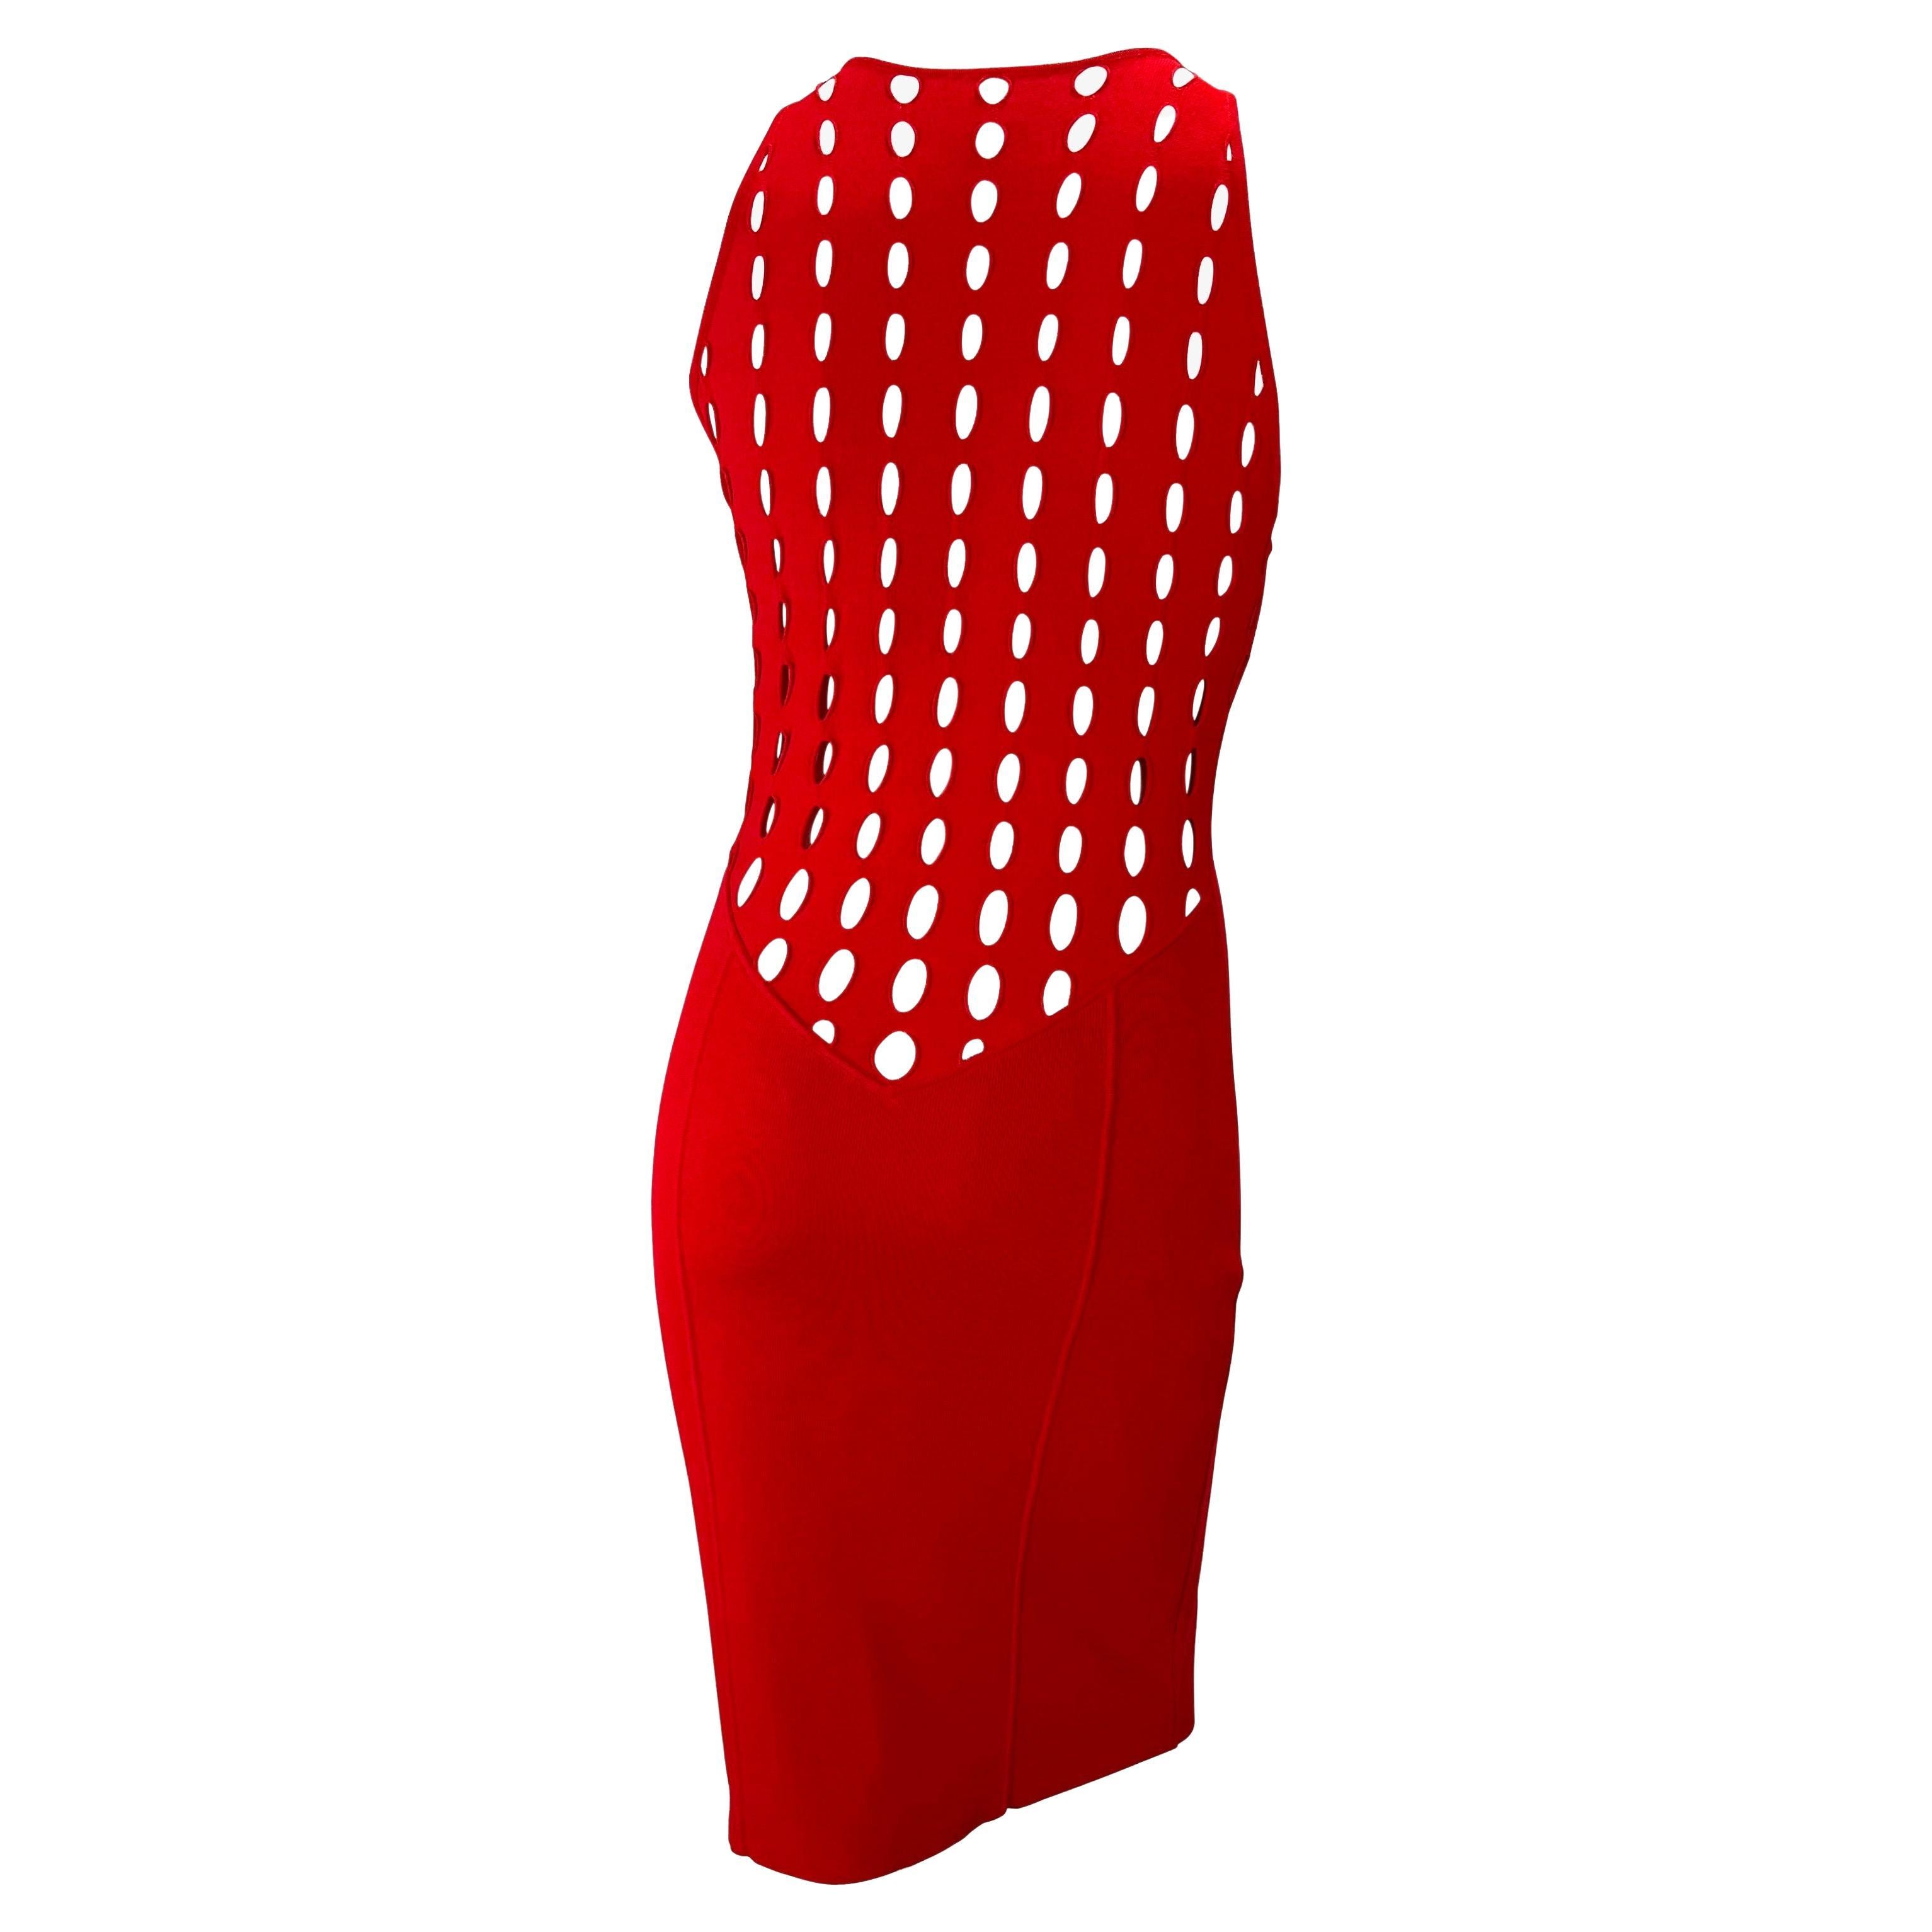 S/S 2002 Gianni Versace by Donatella Red Eyelet Cutout Stretch Racerback Dress For Sale